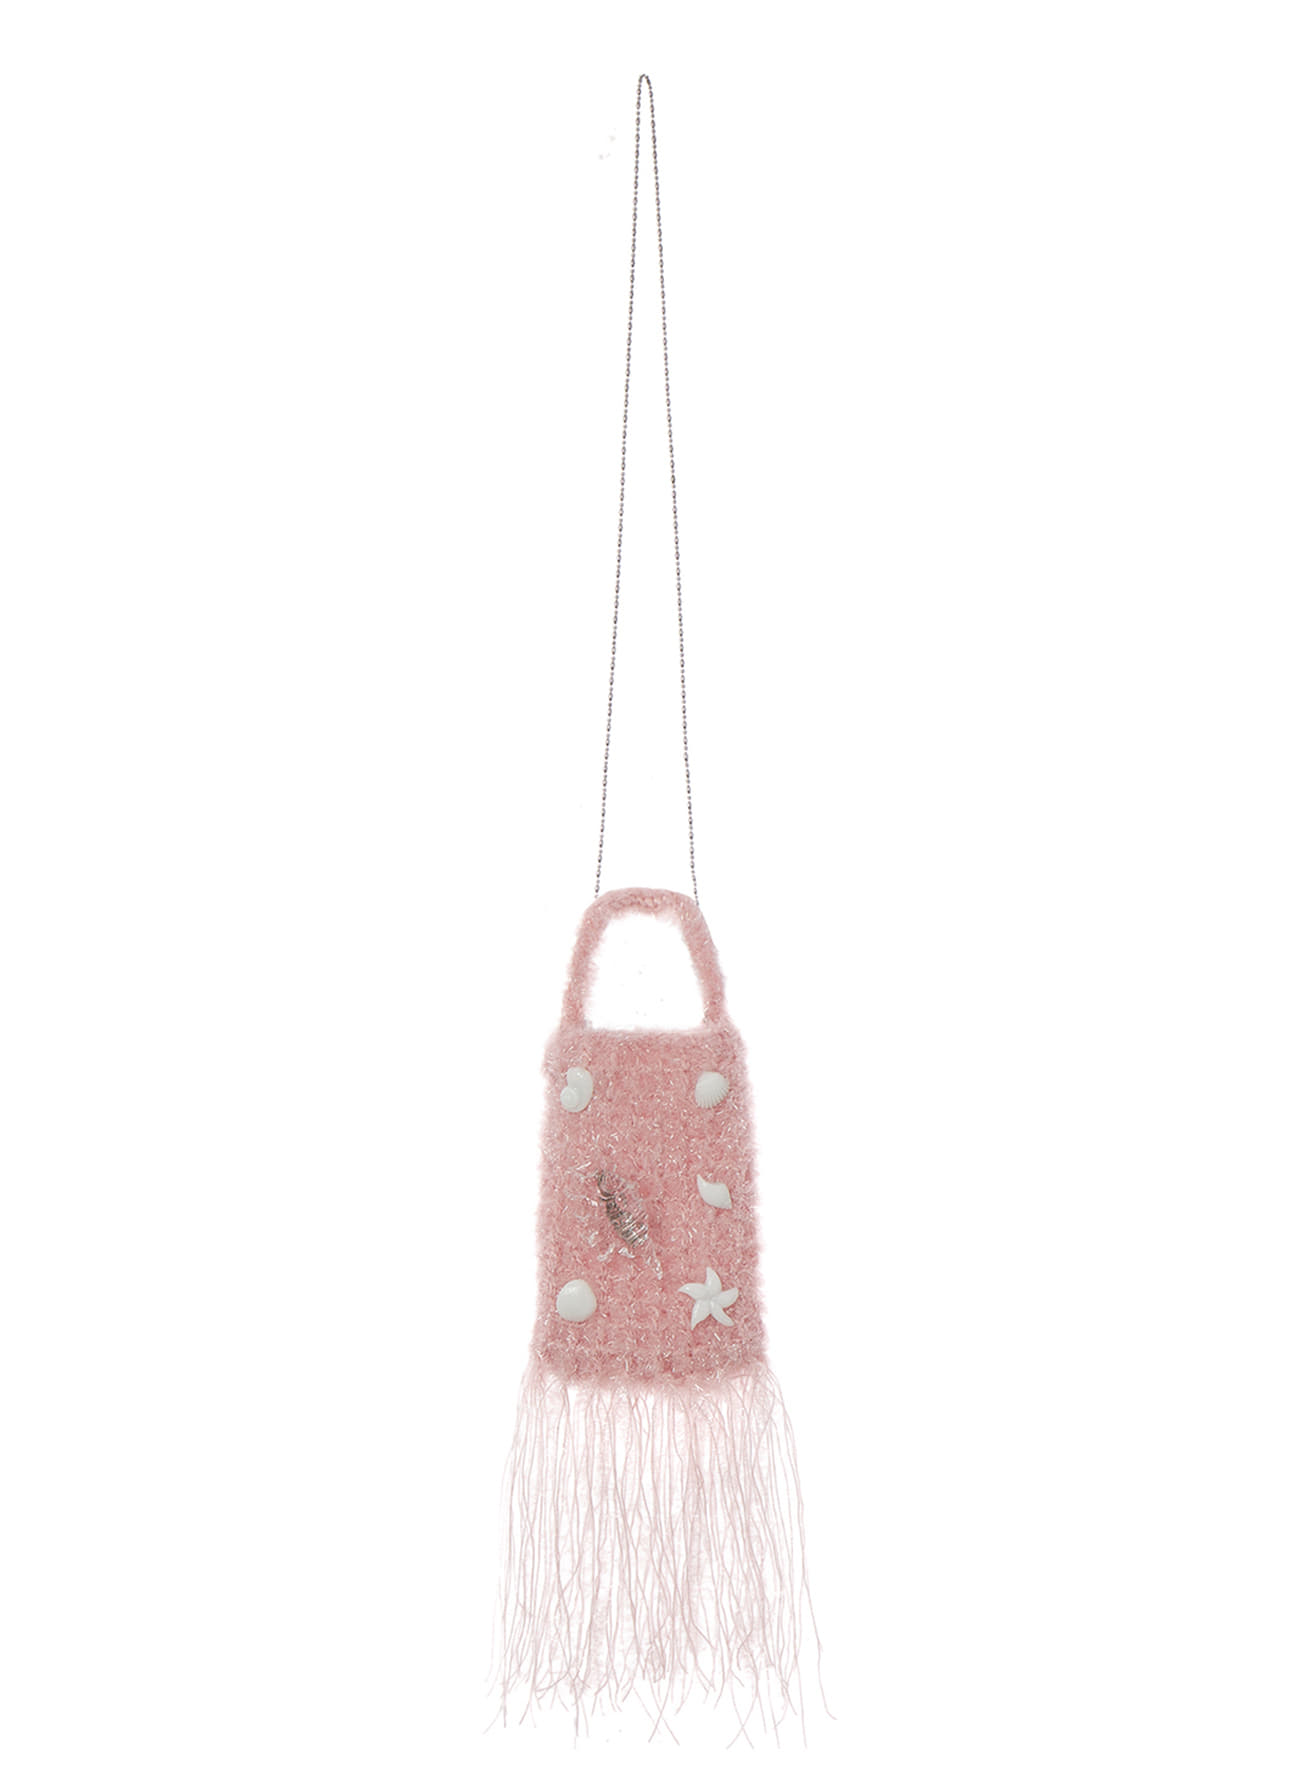 SEA COLLECTION KNITTED BAG, PINK